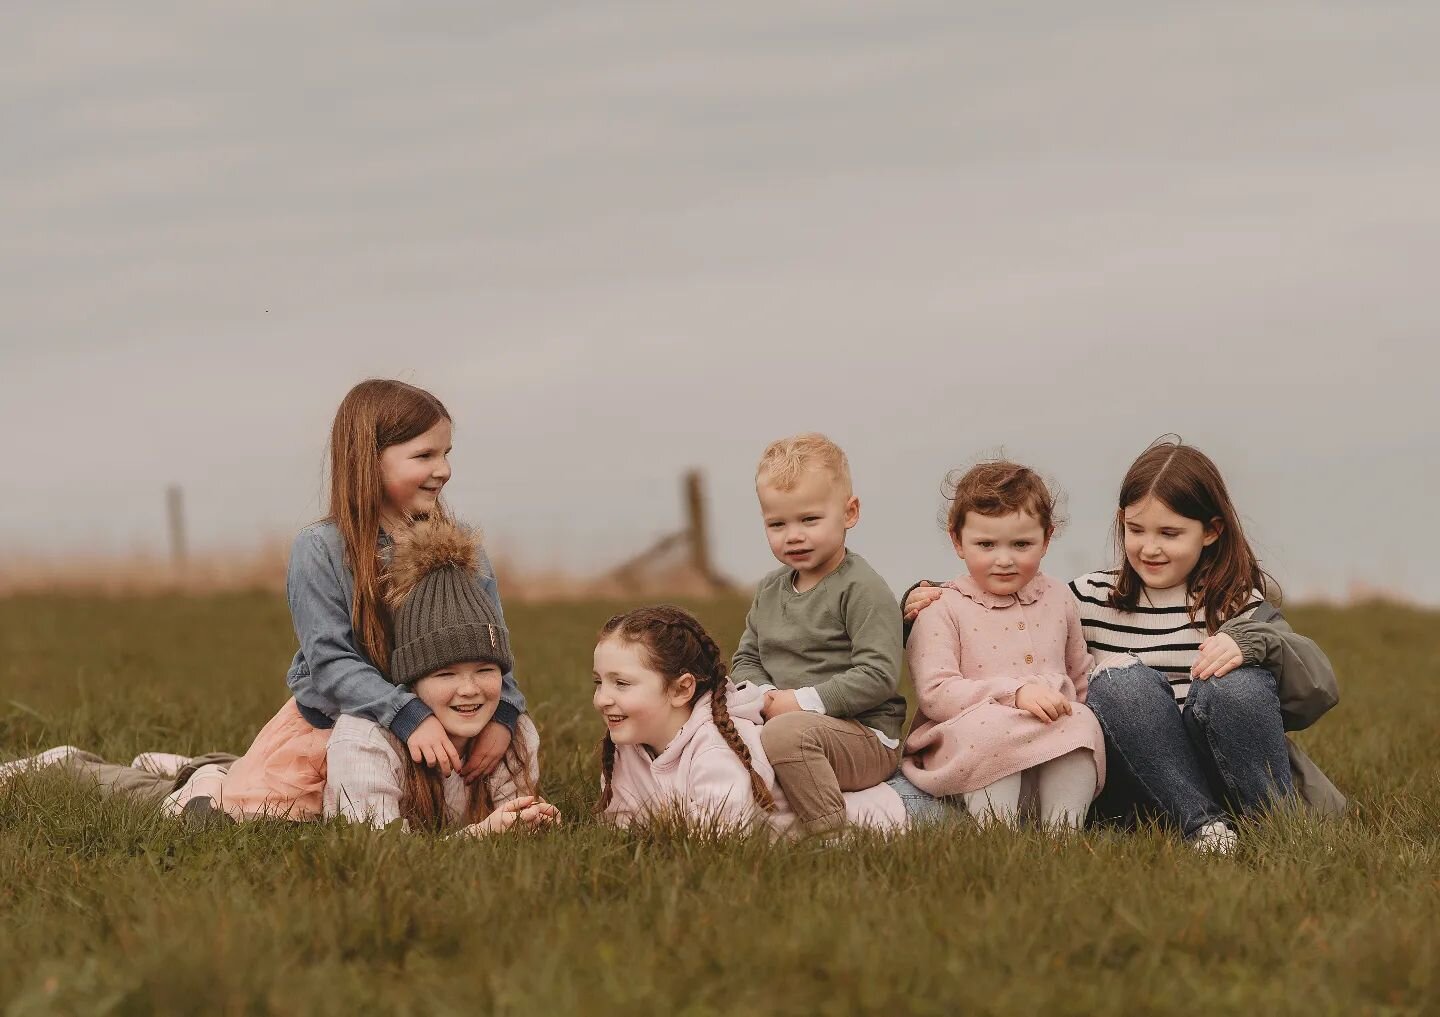 How do I get six kids to settle for a photograph together? Have them do rolypoly races down a grass hill and wait for them to eventually flop....obviously! 😂🙈

Love an extended family photography session in the beautiful landscapes we have in Aberd